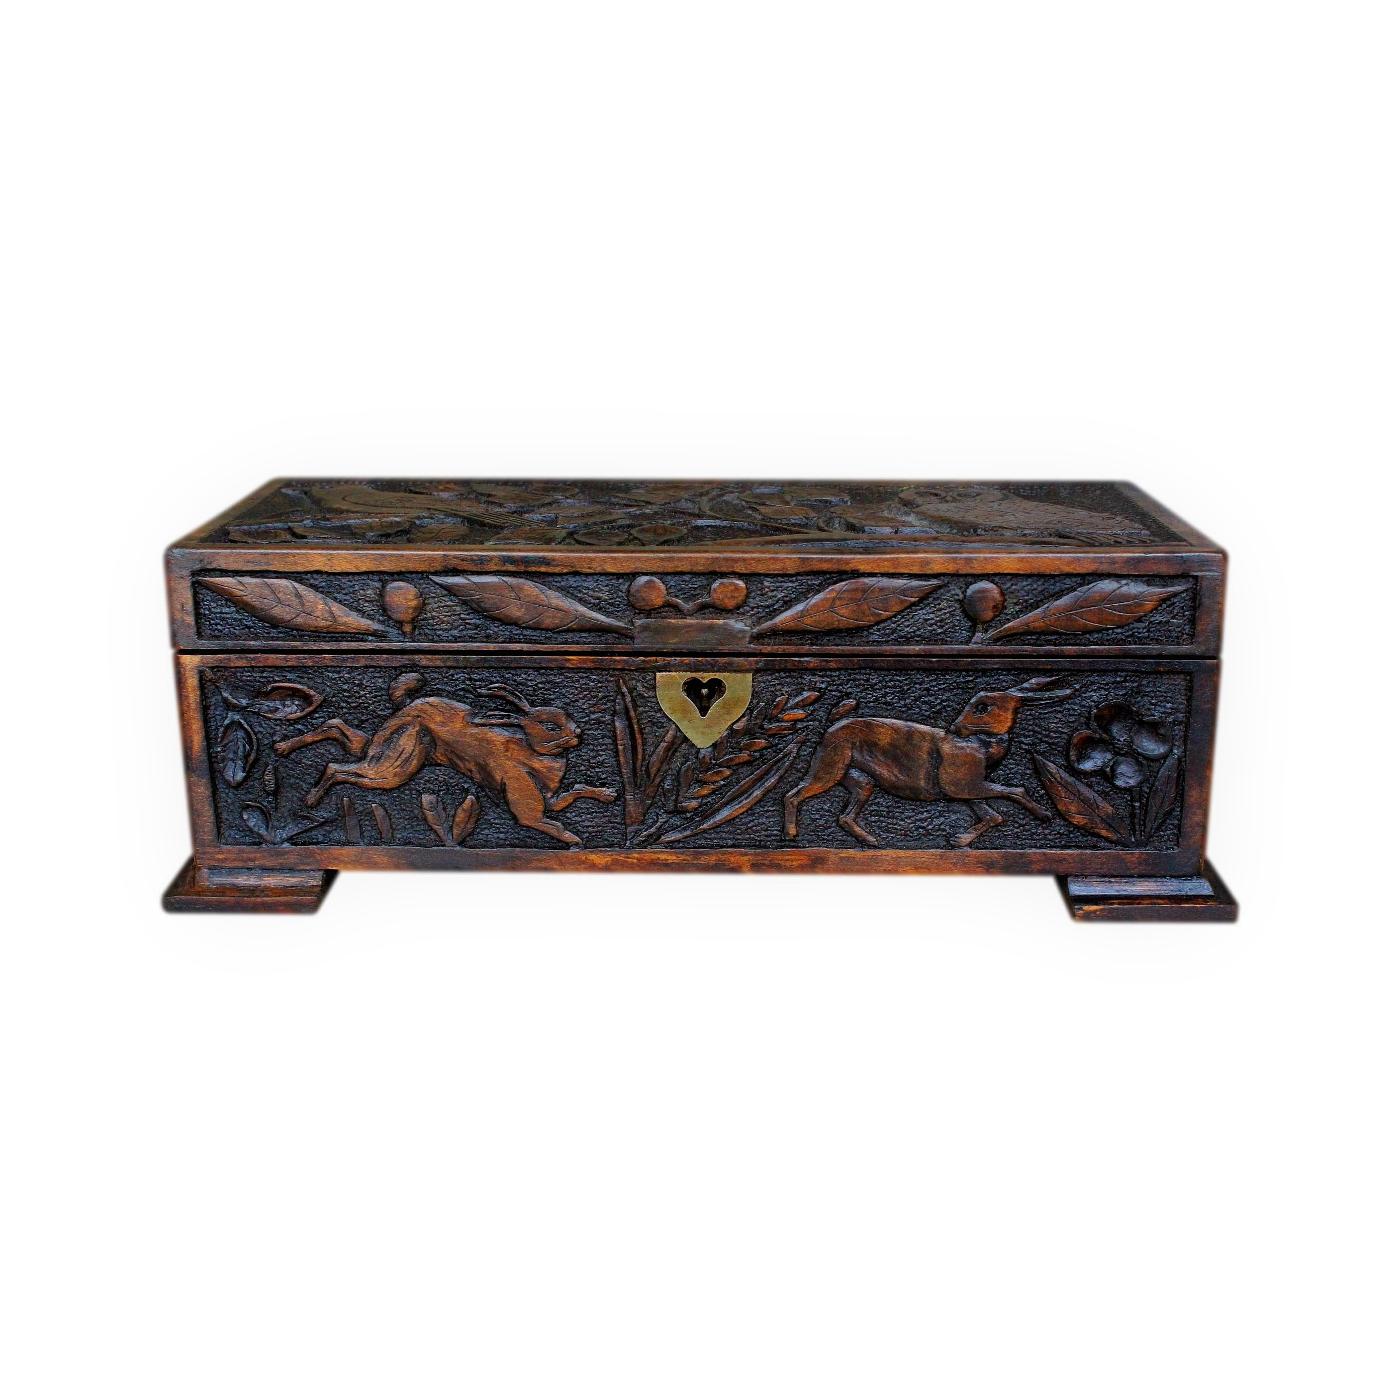 Beautiful Refurbished Handmade And Signed Carved Vintage Jewellery Box